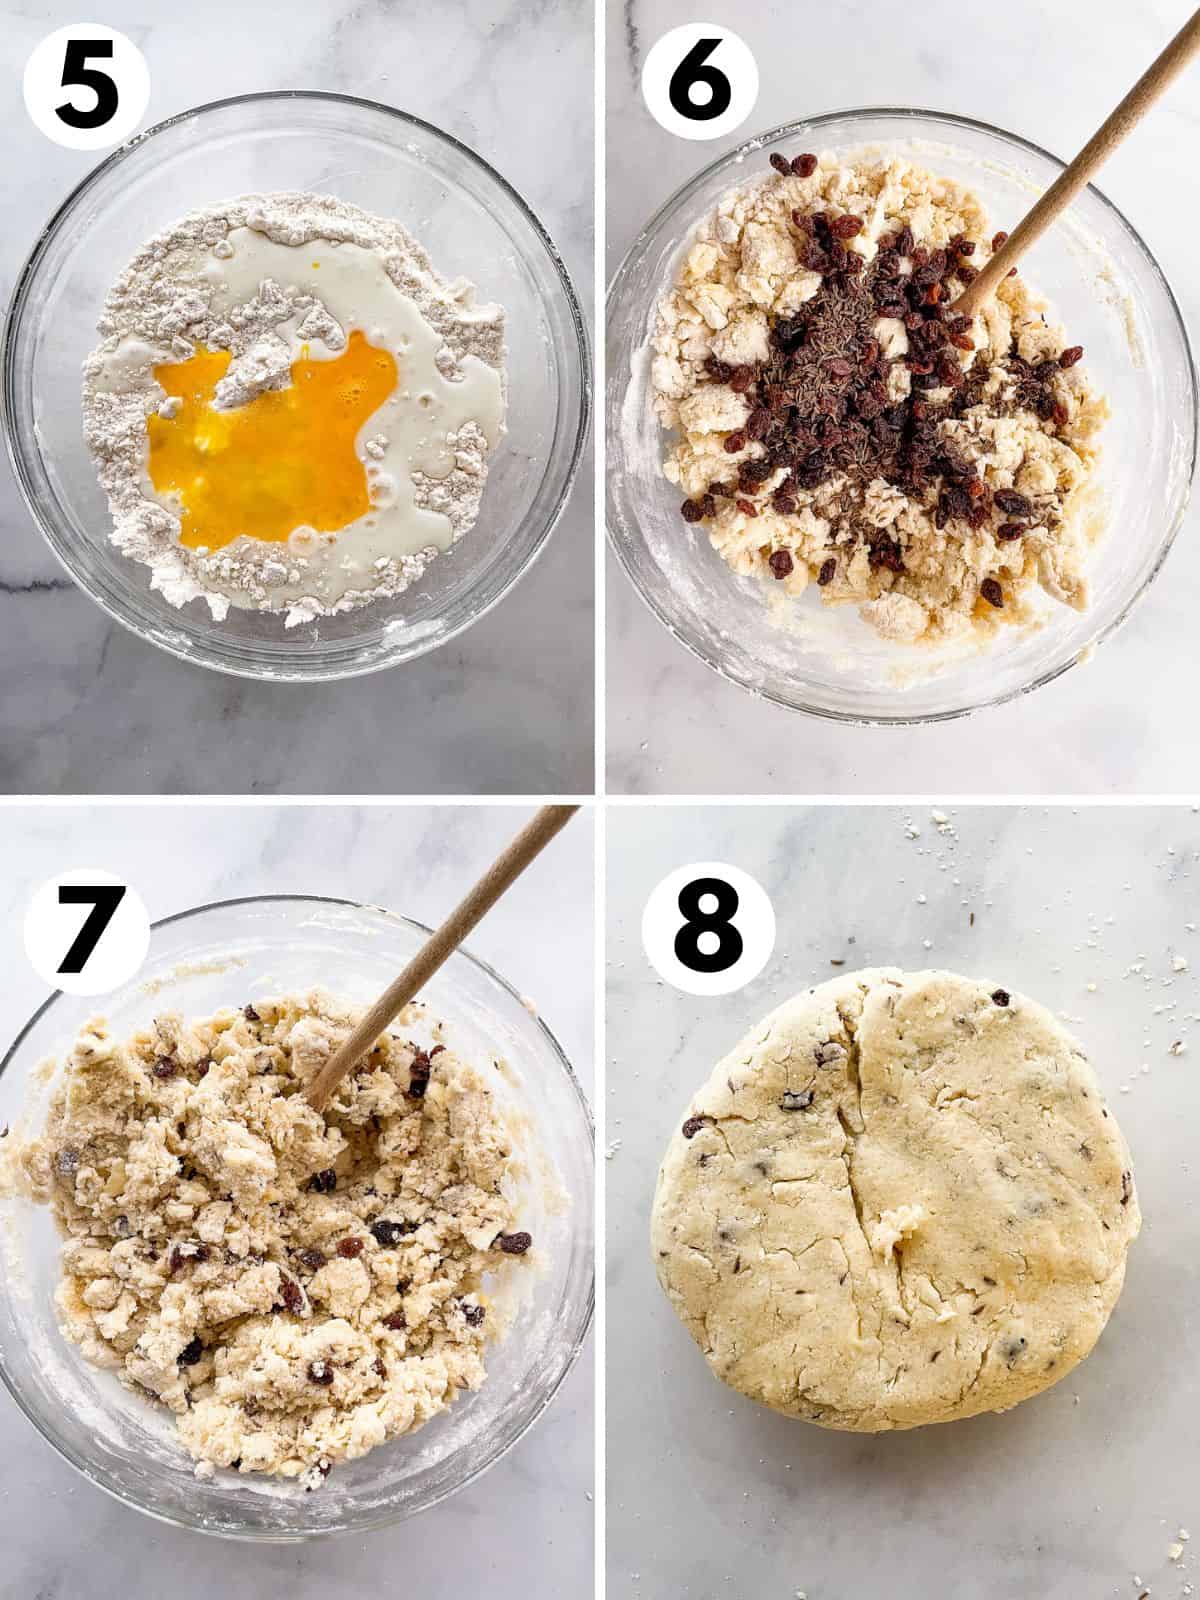 Steps for mixing gluten-free Irish soda bread. 5. Adding wet ingredients. 6. Dough mixed. Adding raisins and caraway seeds. 7. Raisins and caraway seeds stirred into dough. 8. Shaped dough on counter.